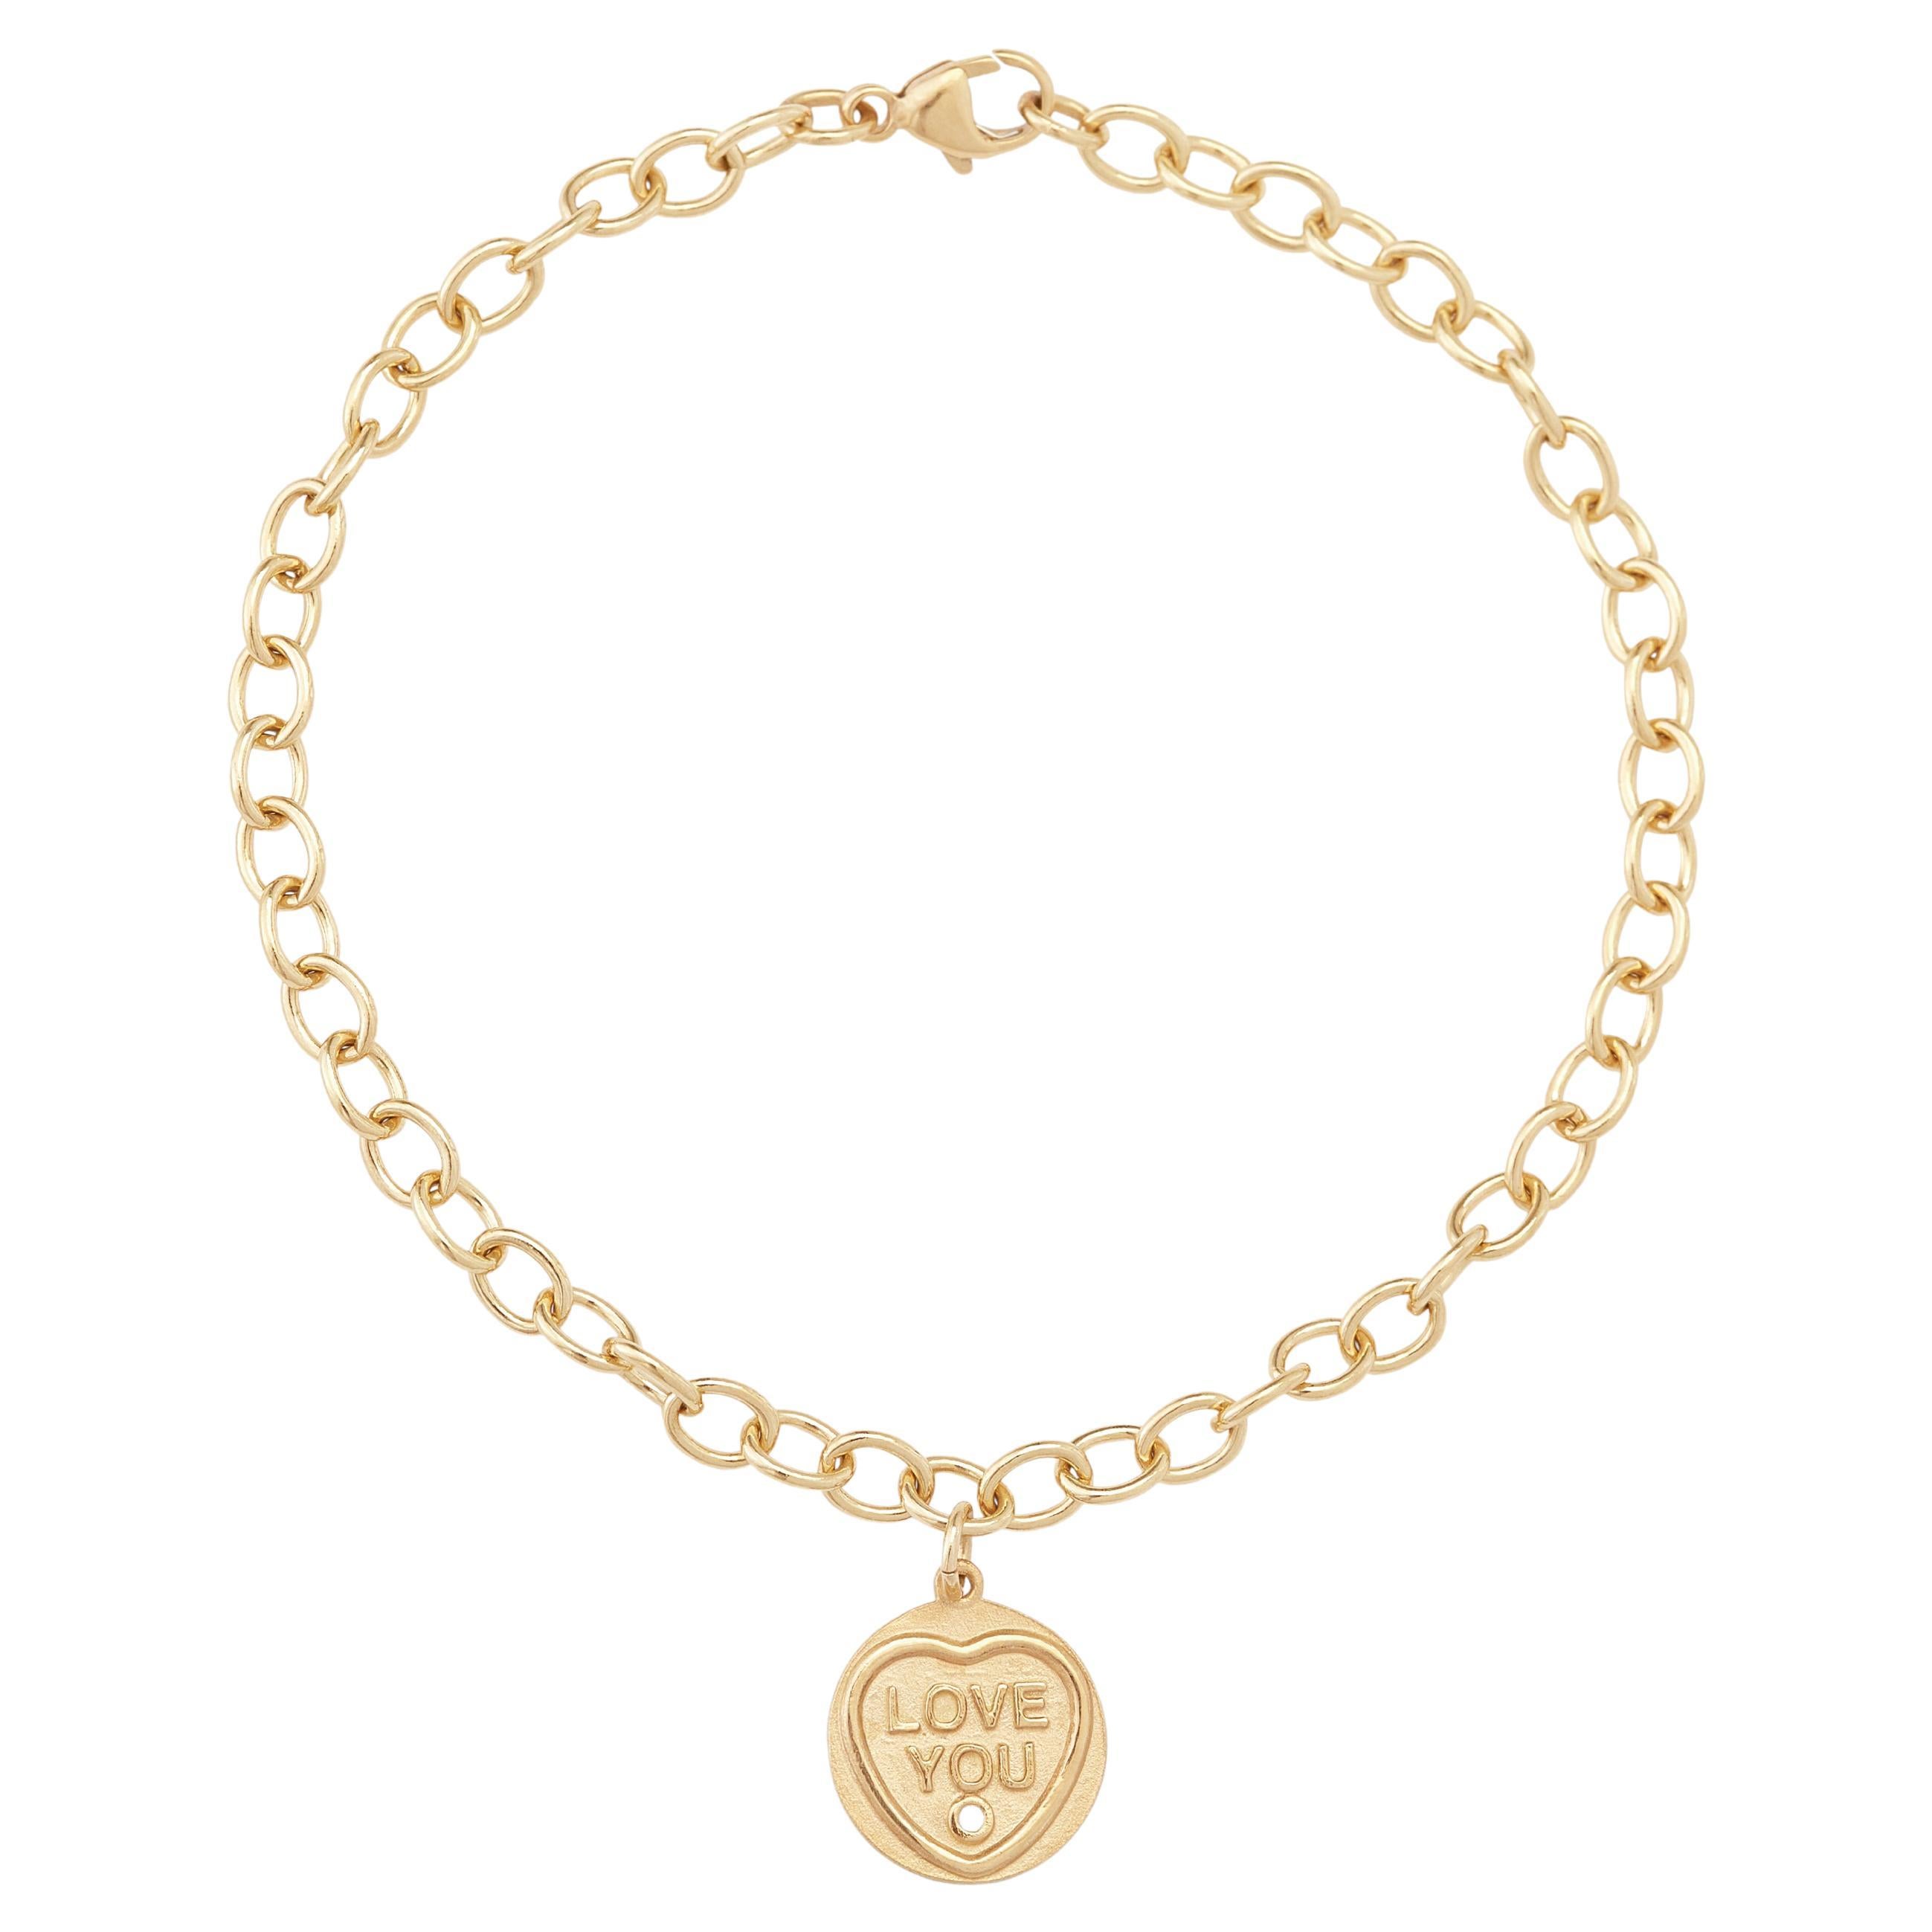 Love Hearts Love You Charm Bracelet in 18 Carat Gold and Diamond